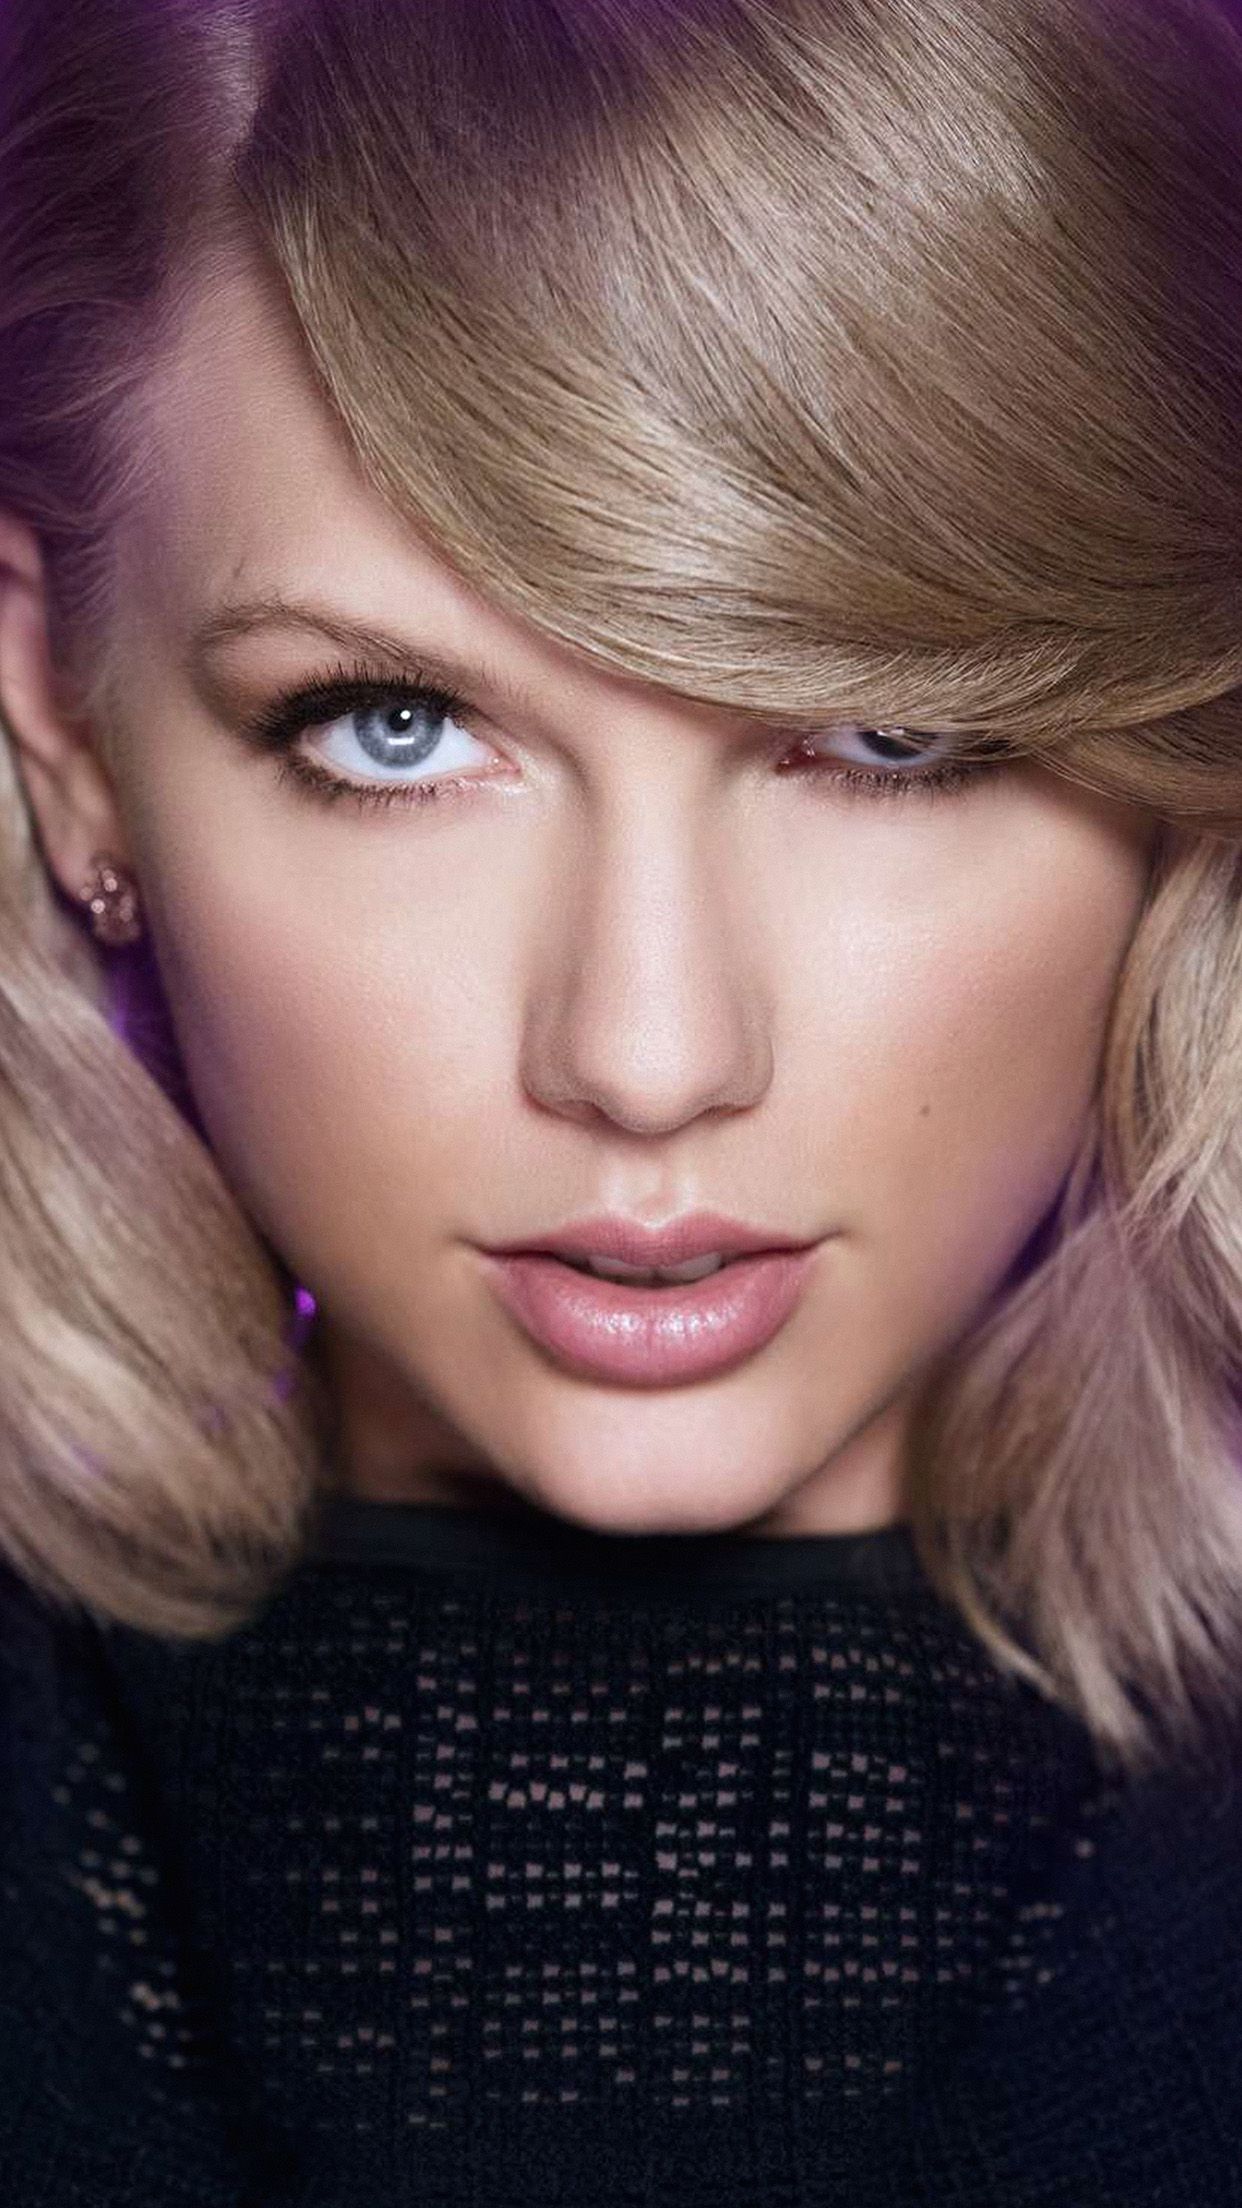 Taylor Swift Hd Android Wallpapers Wallpaper Cave